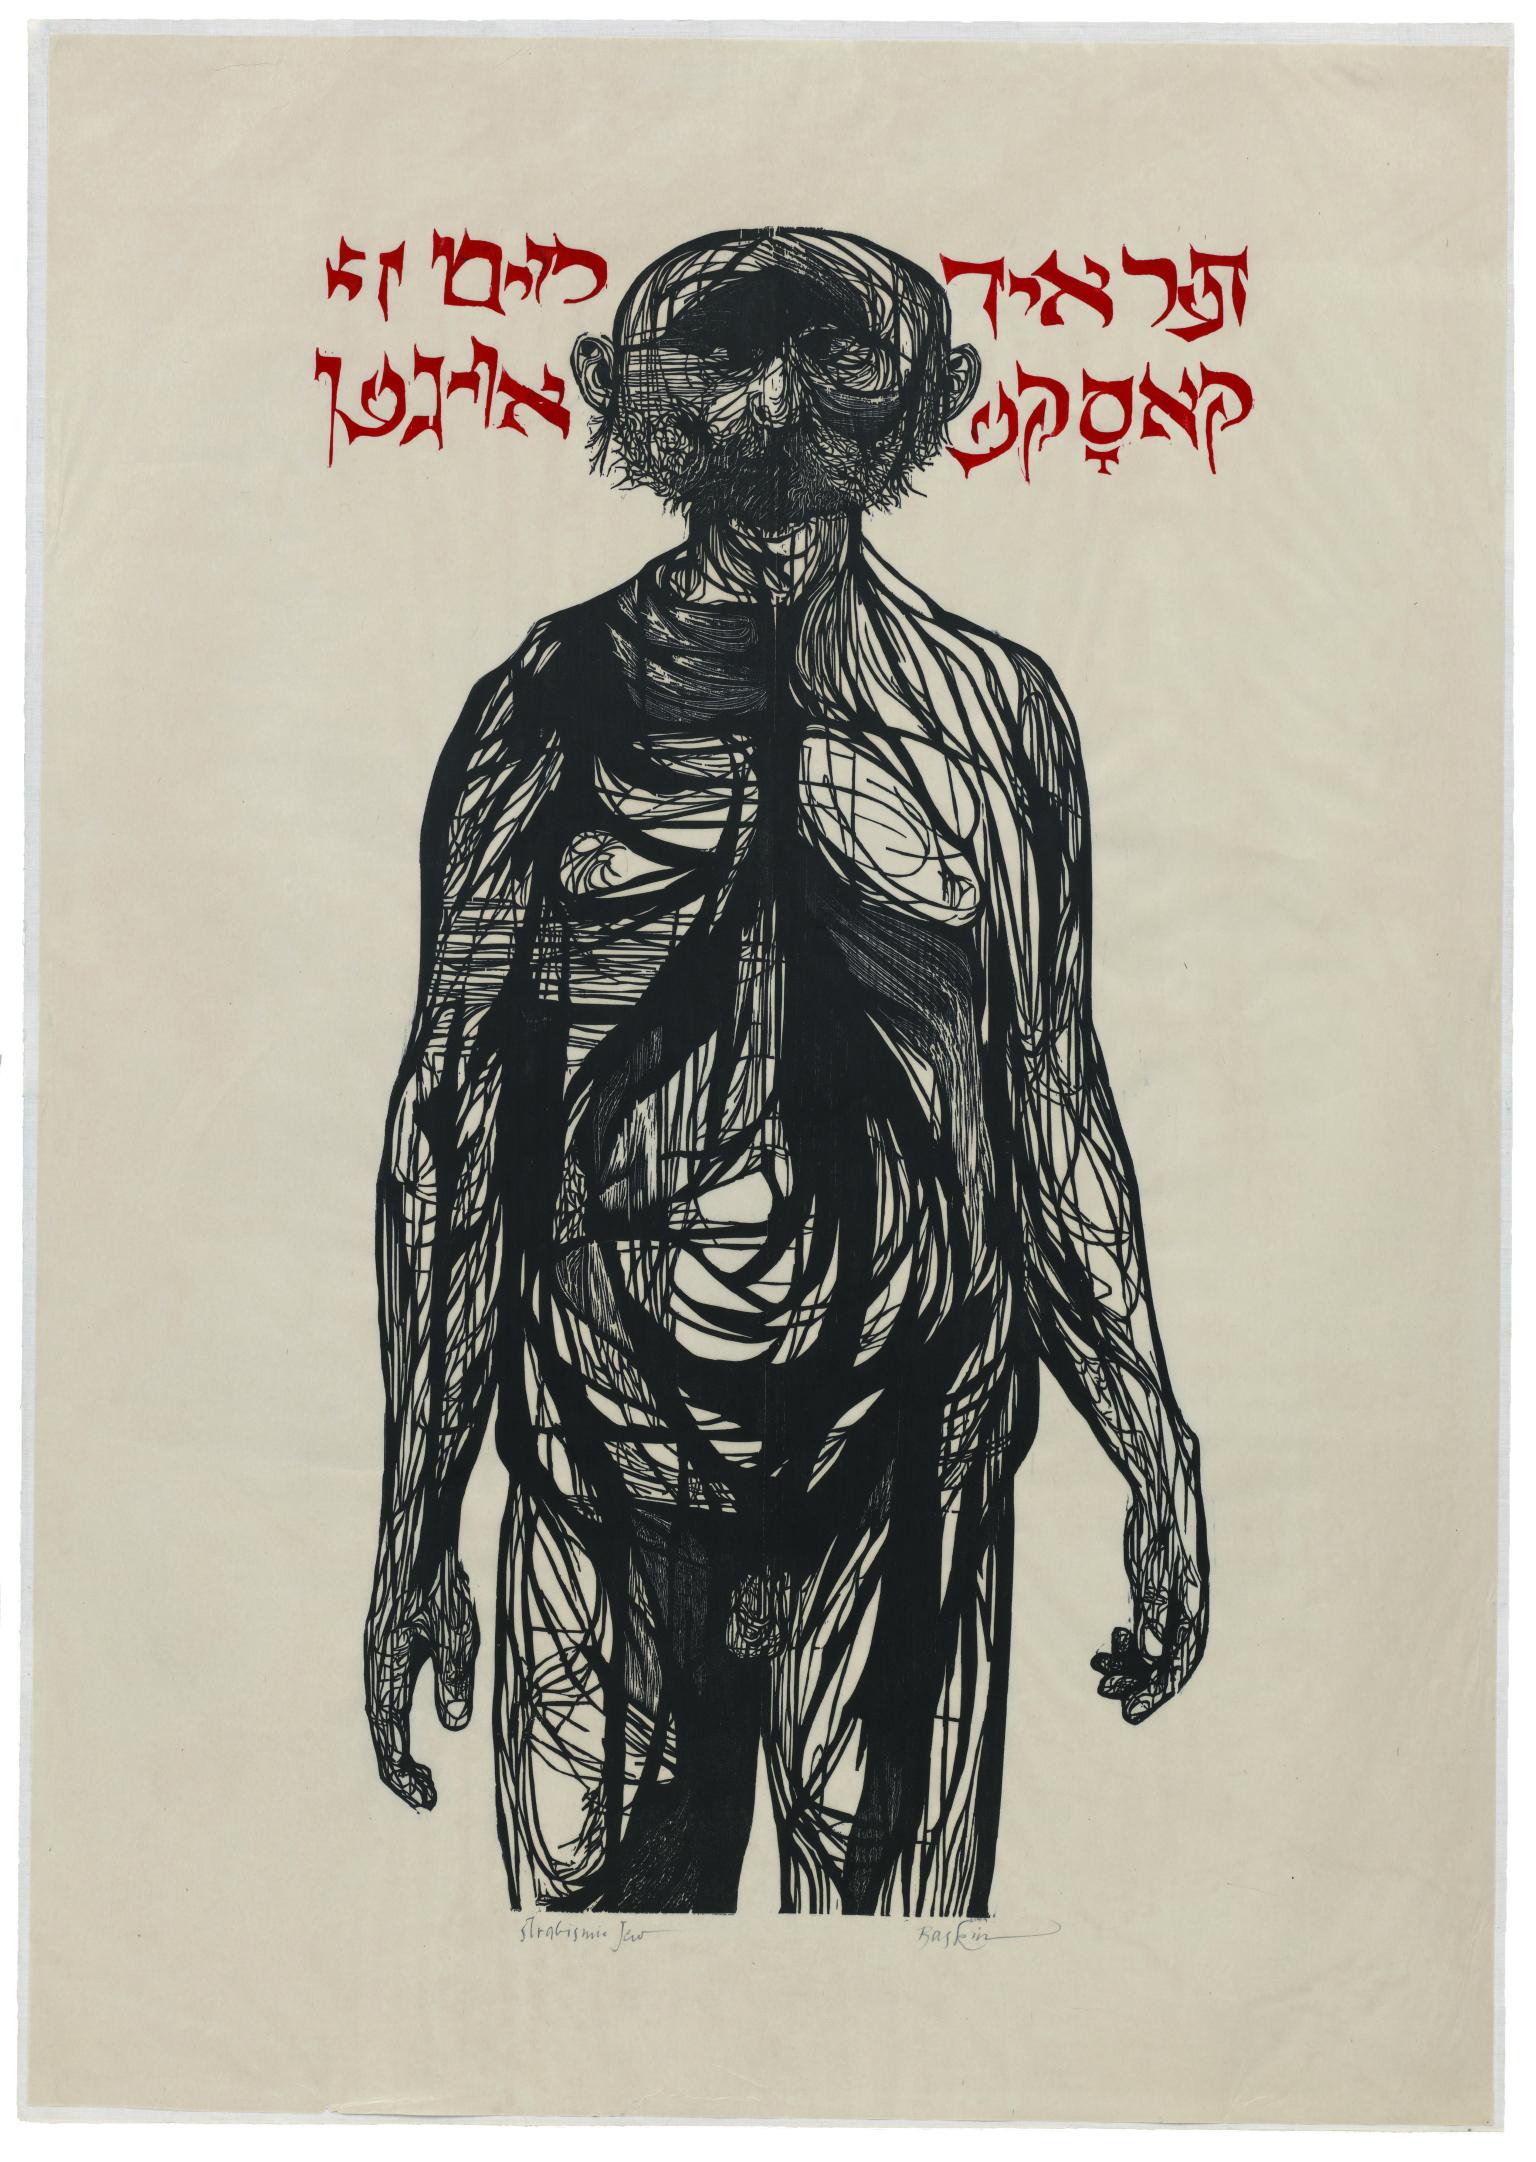 Woodcut featuring male figure facing viewer made out of network of lines and Yiddish text above figure.